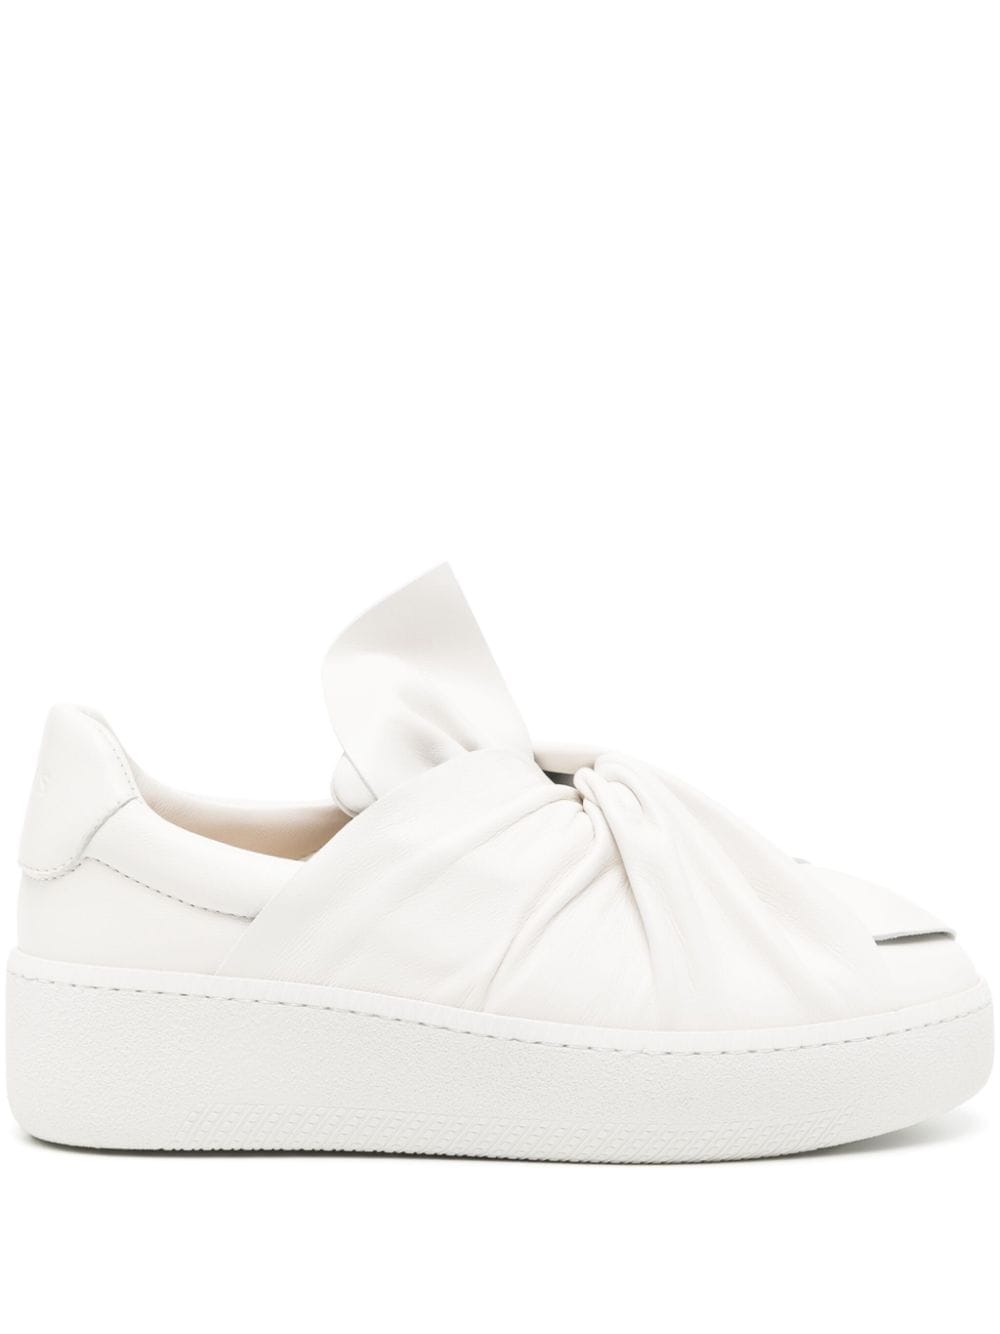 Ports 1961 Bee Leather Sneakers In Gray